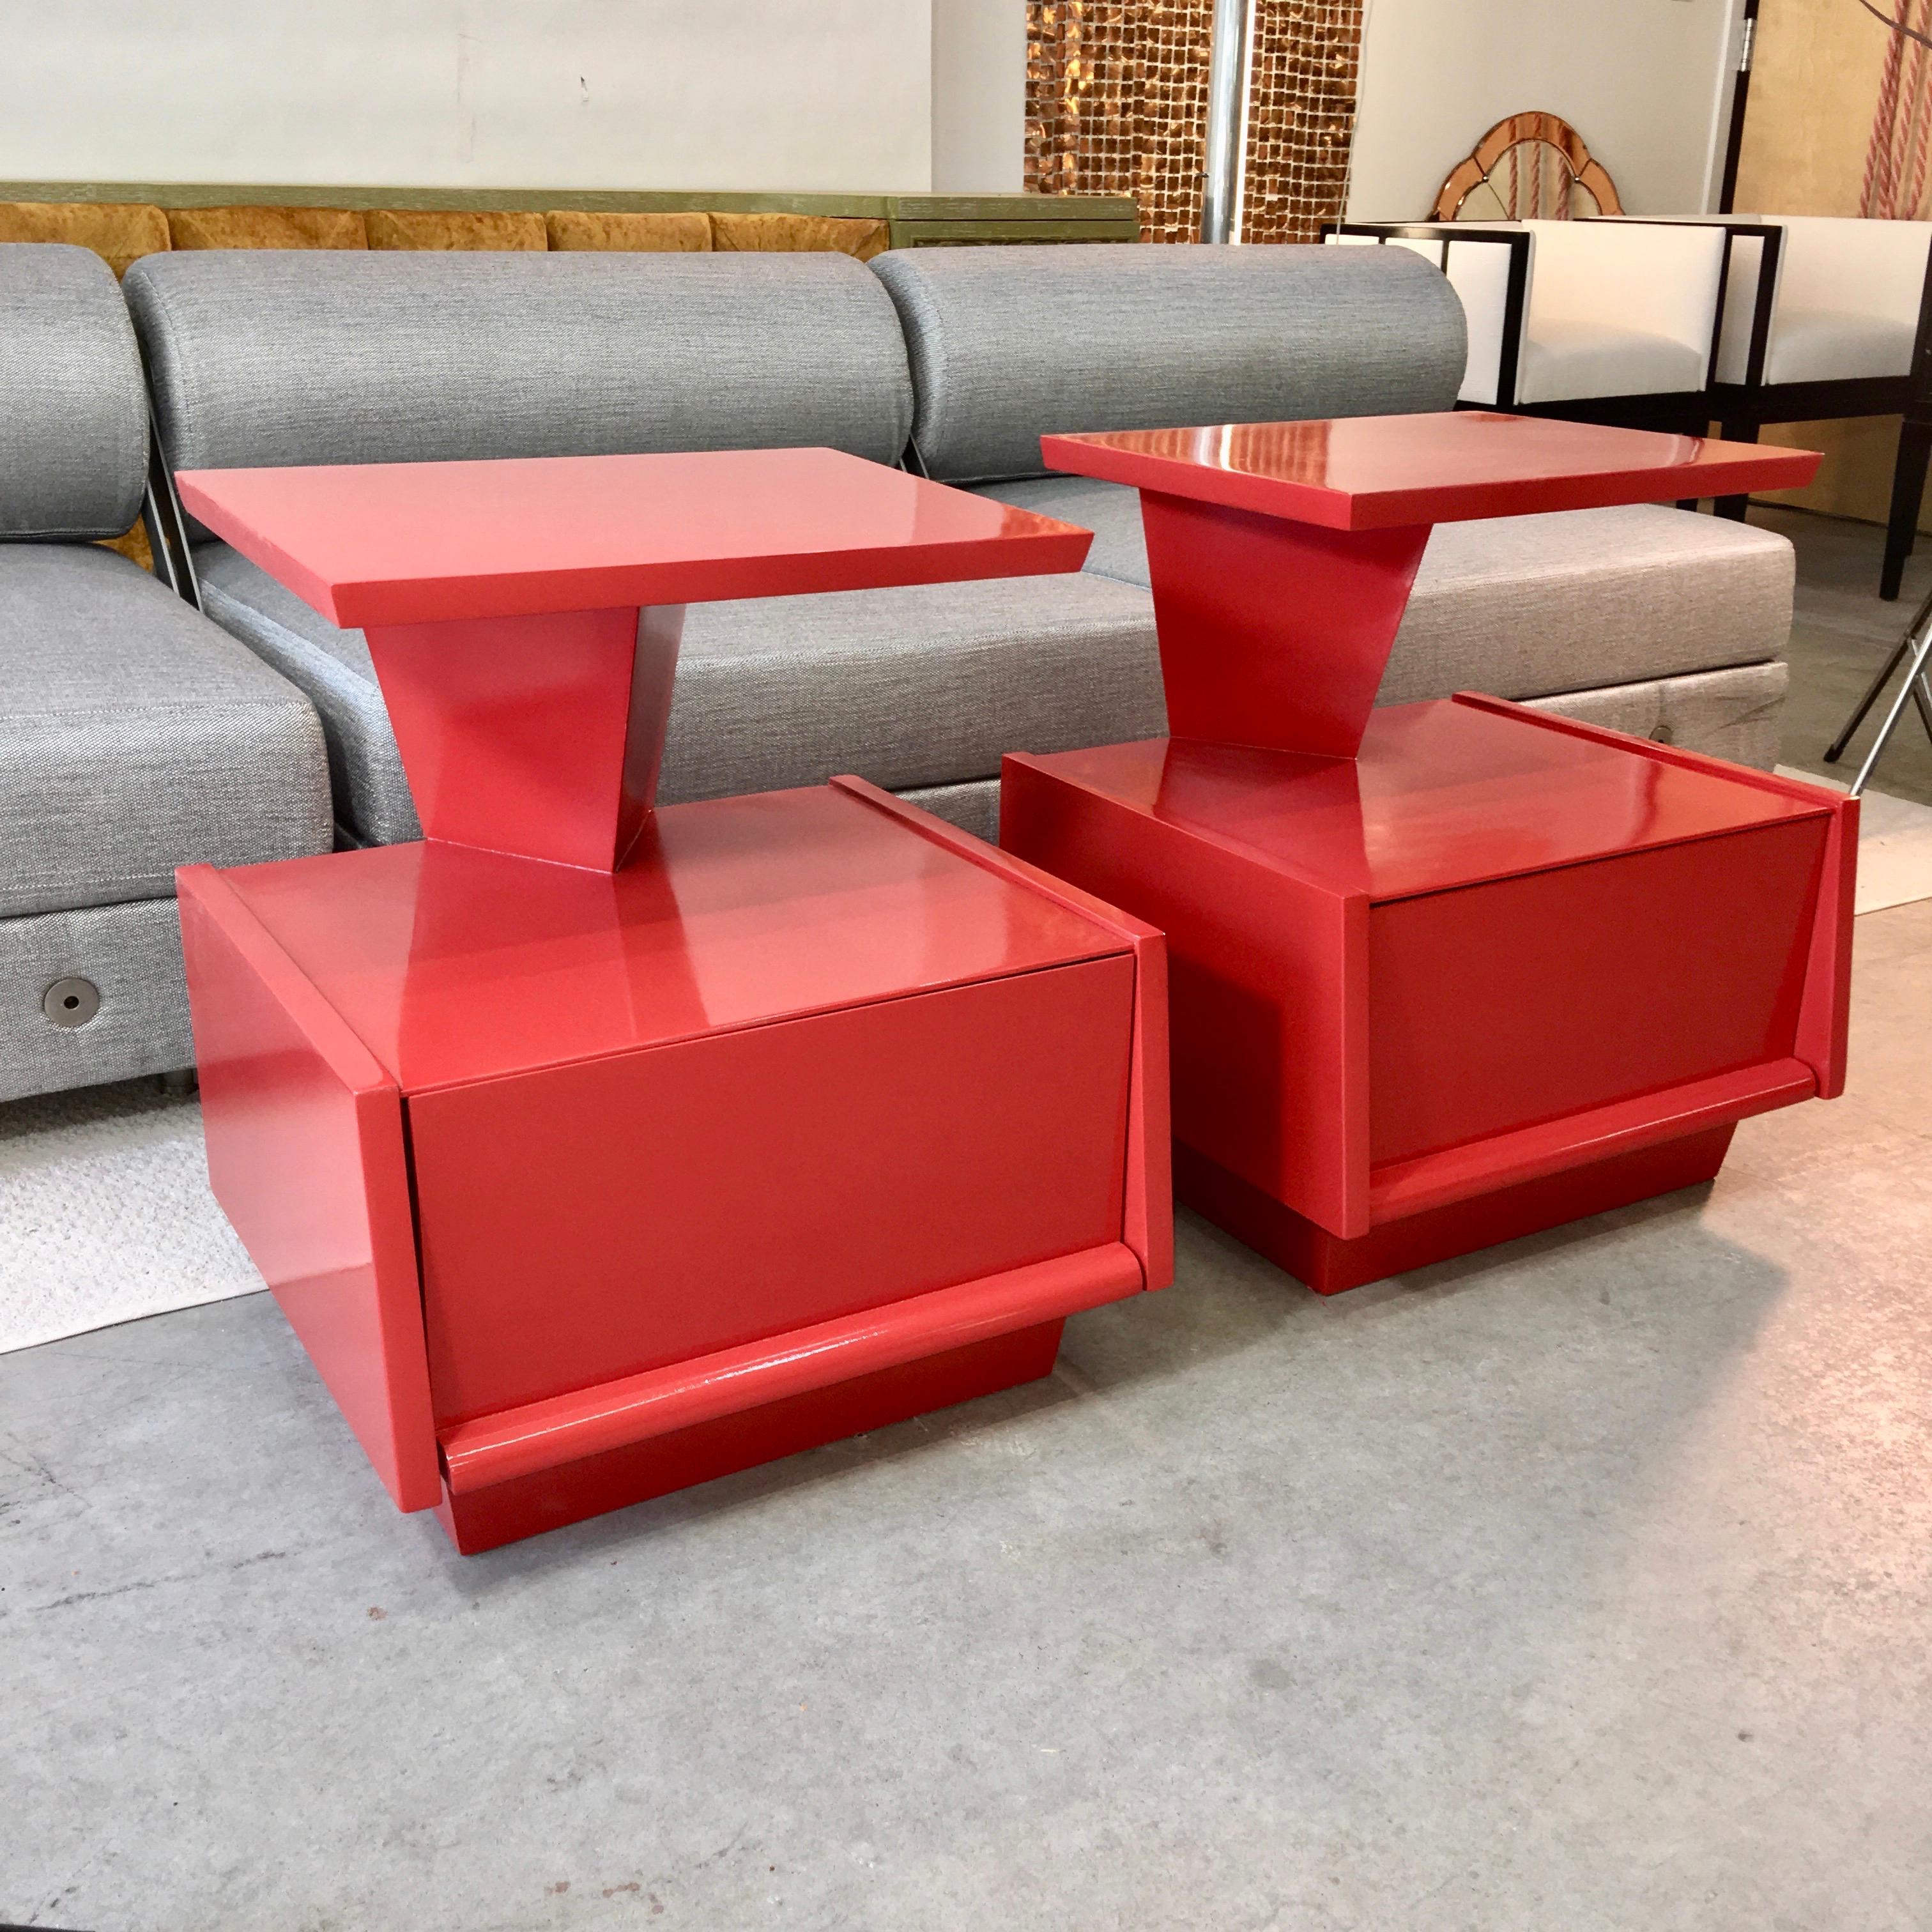 Pair of 1950s nightstands with an almost anthropomorphic science fiction vibe, one almost expects them to start bleeping and tidy up the bedroom.
During the 1950s Mengel Furniture was associated with such design luminaries as Raymond Loewy and